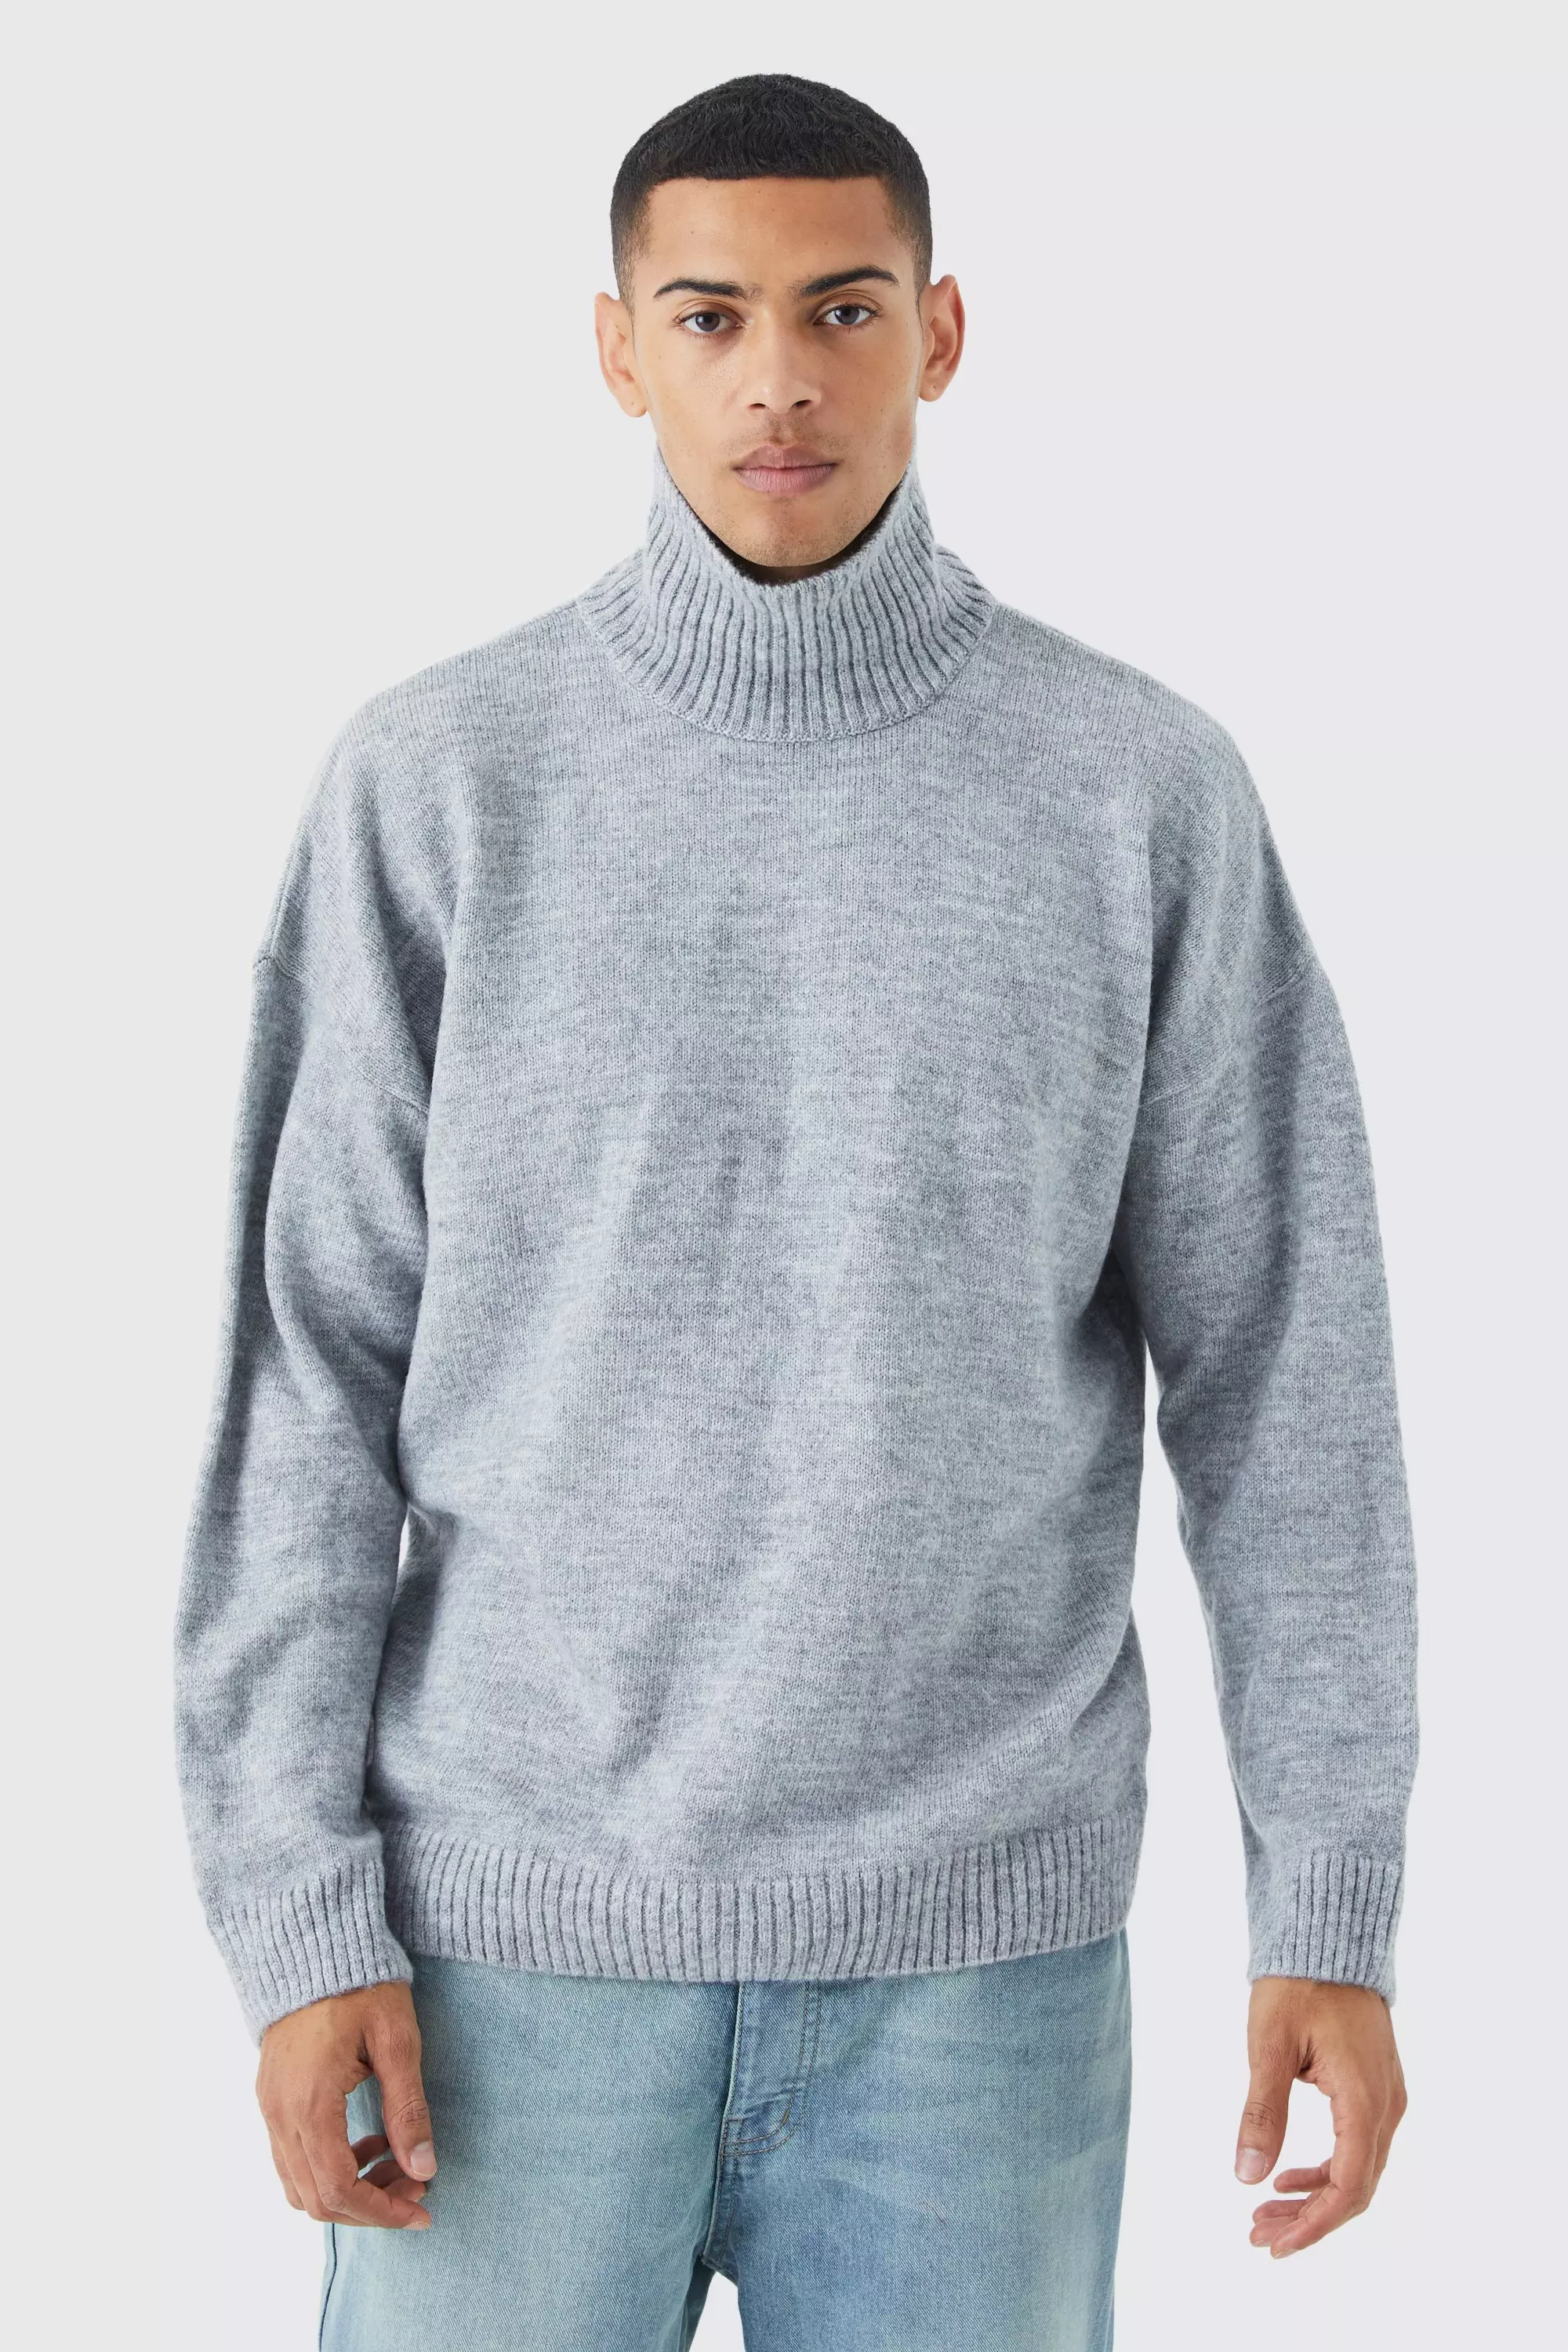 Charcoal Grey Oversized Funnel Neck Brushed Knit Sweater